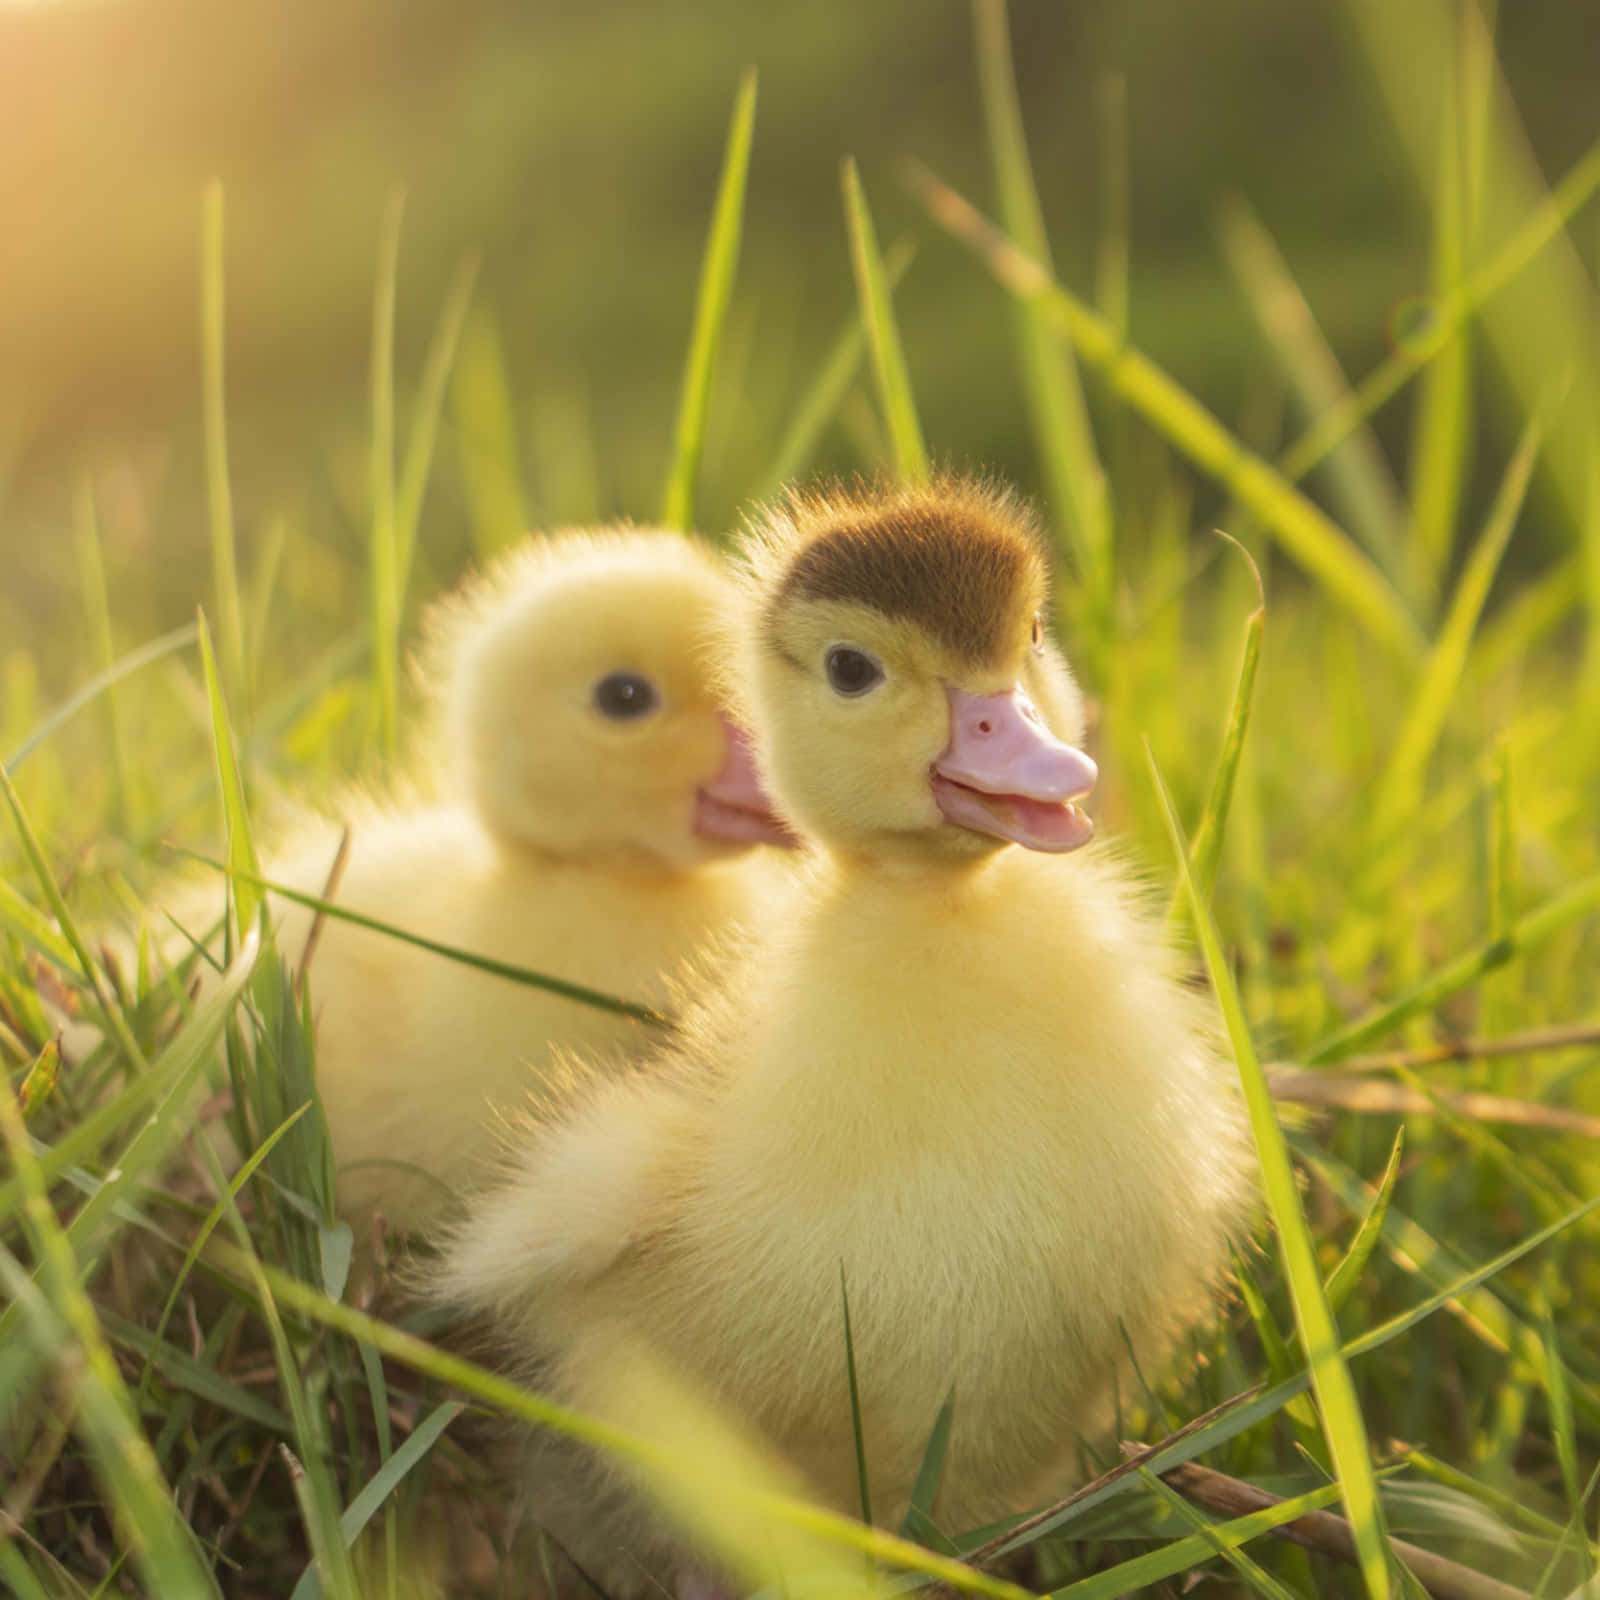 Two Baby Ducks Are Sitting In The Grass